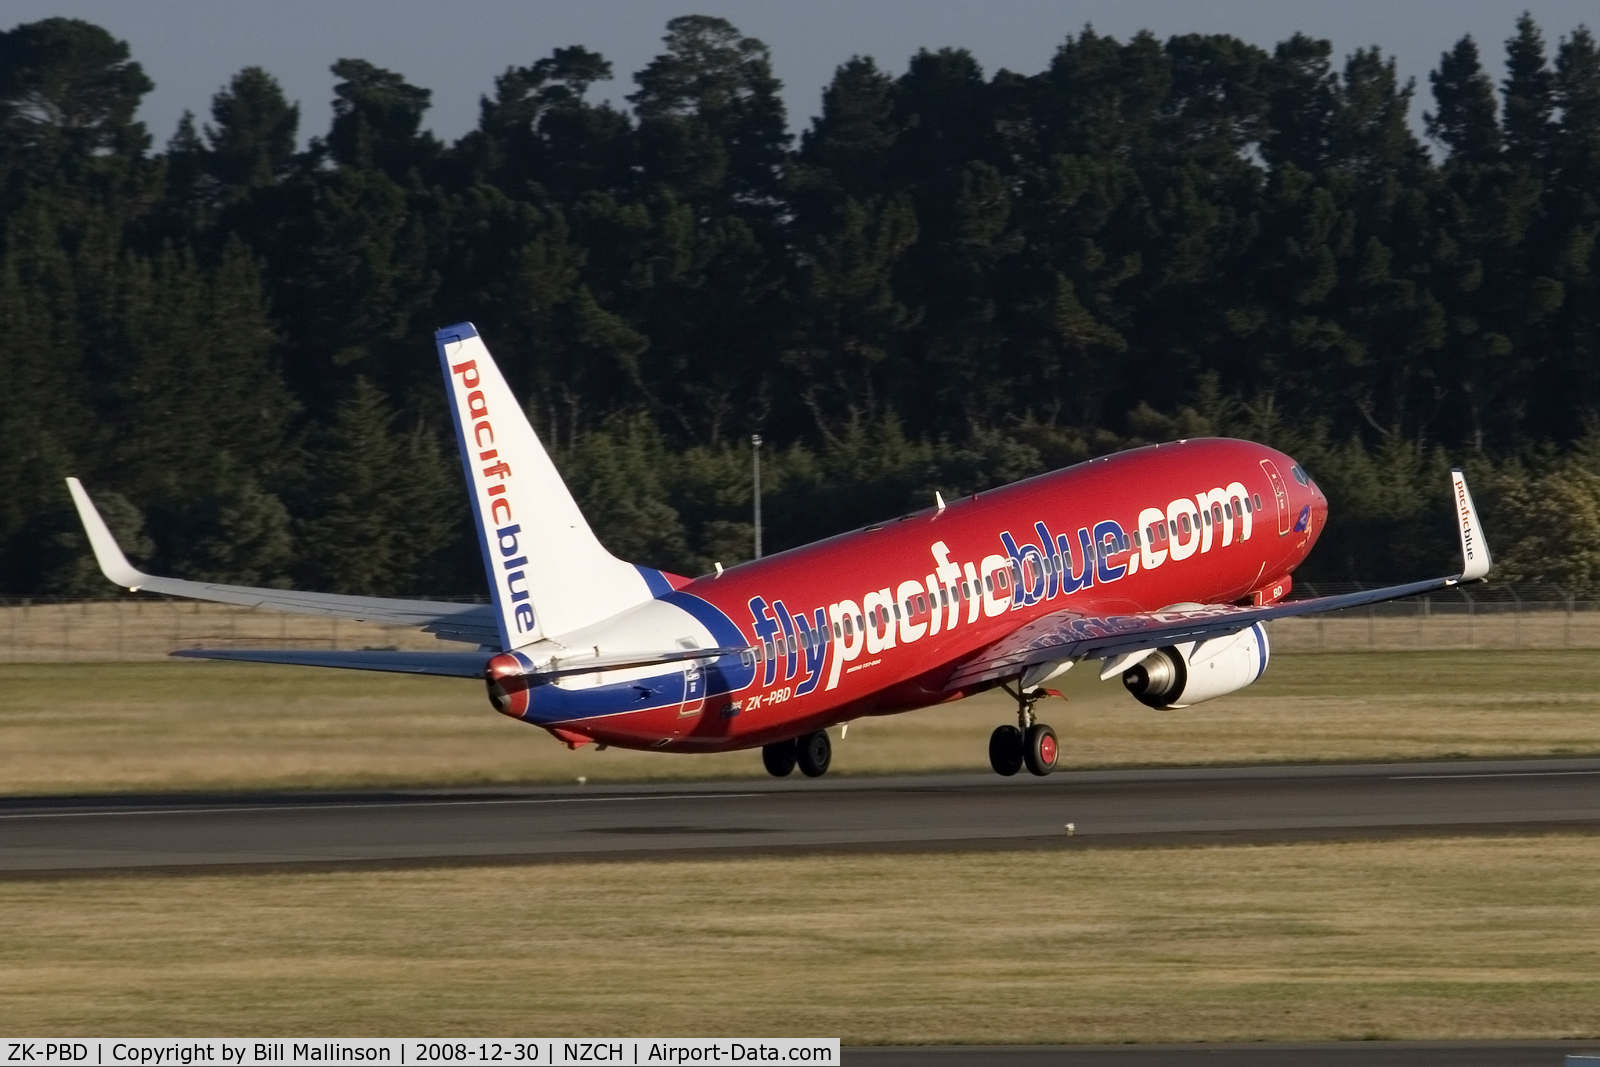 ZK-PBD, 2004 Boeing 737-8FE C/N 33996, up and away from 02